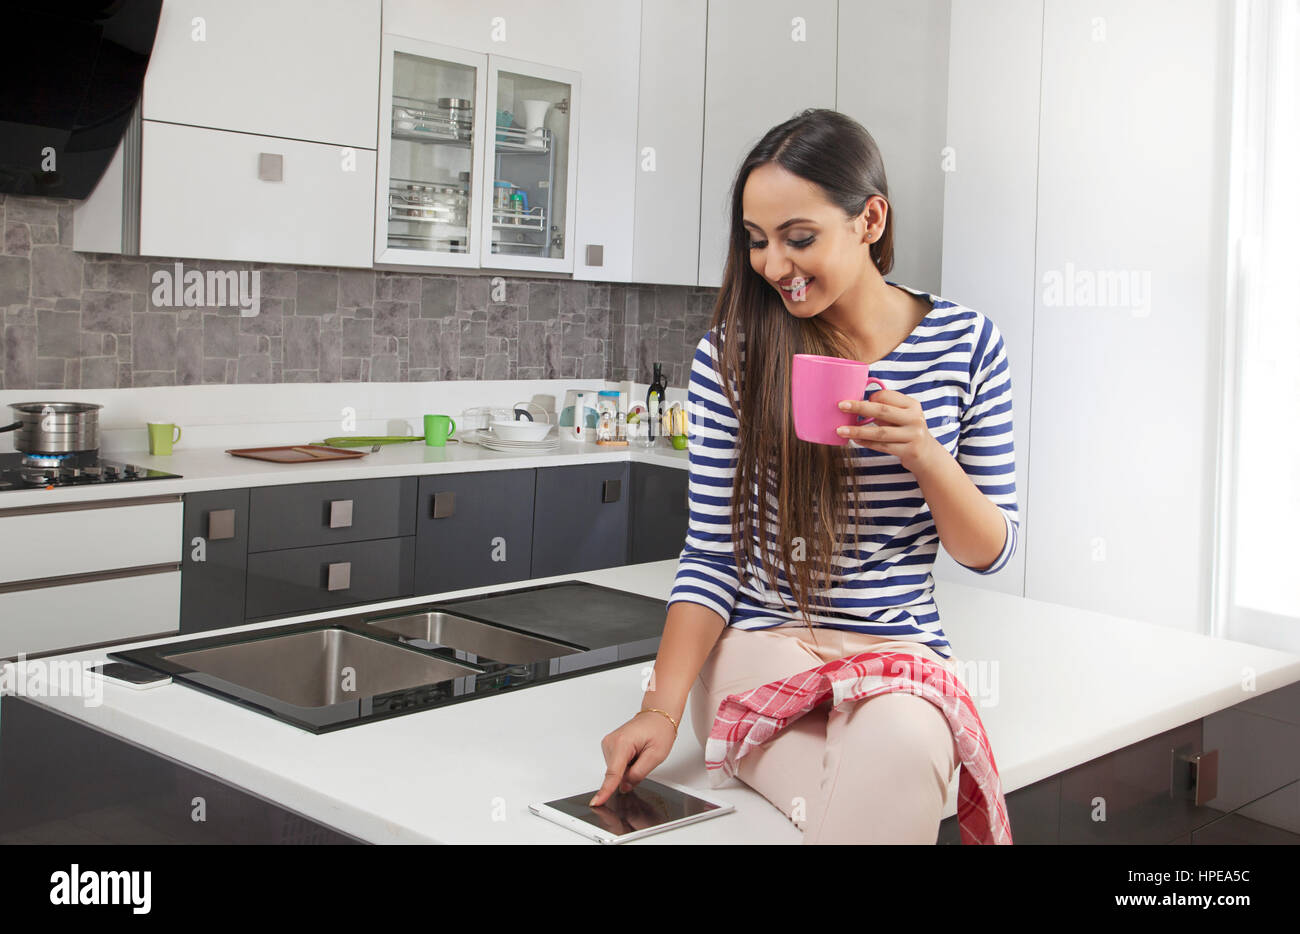 Young woman holding cup of tea using digital tablet in kitchen Stock Photo